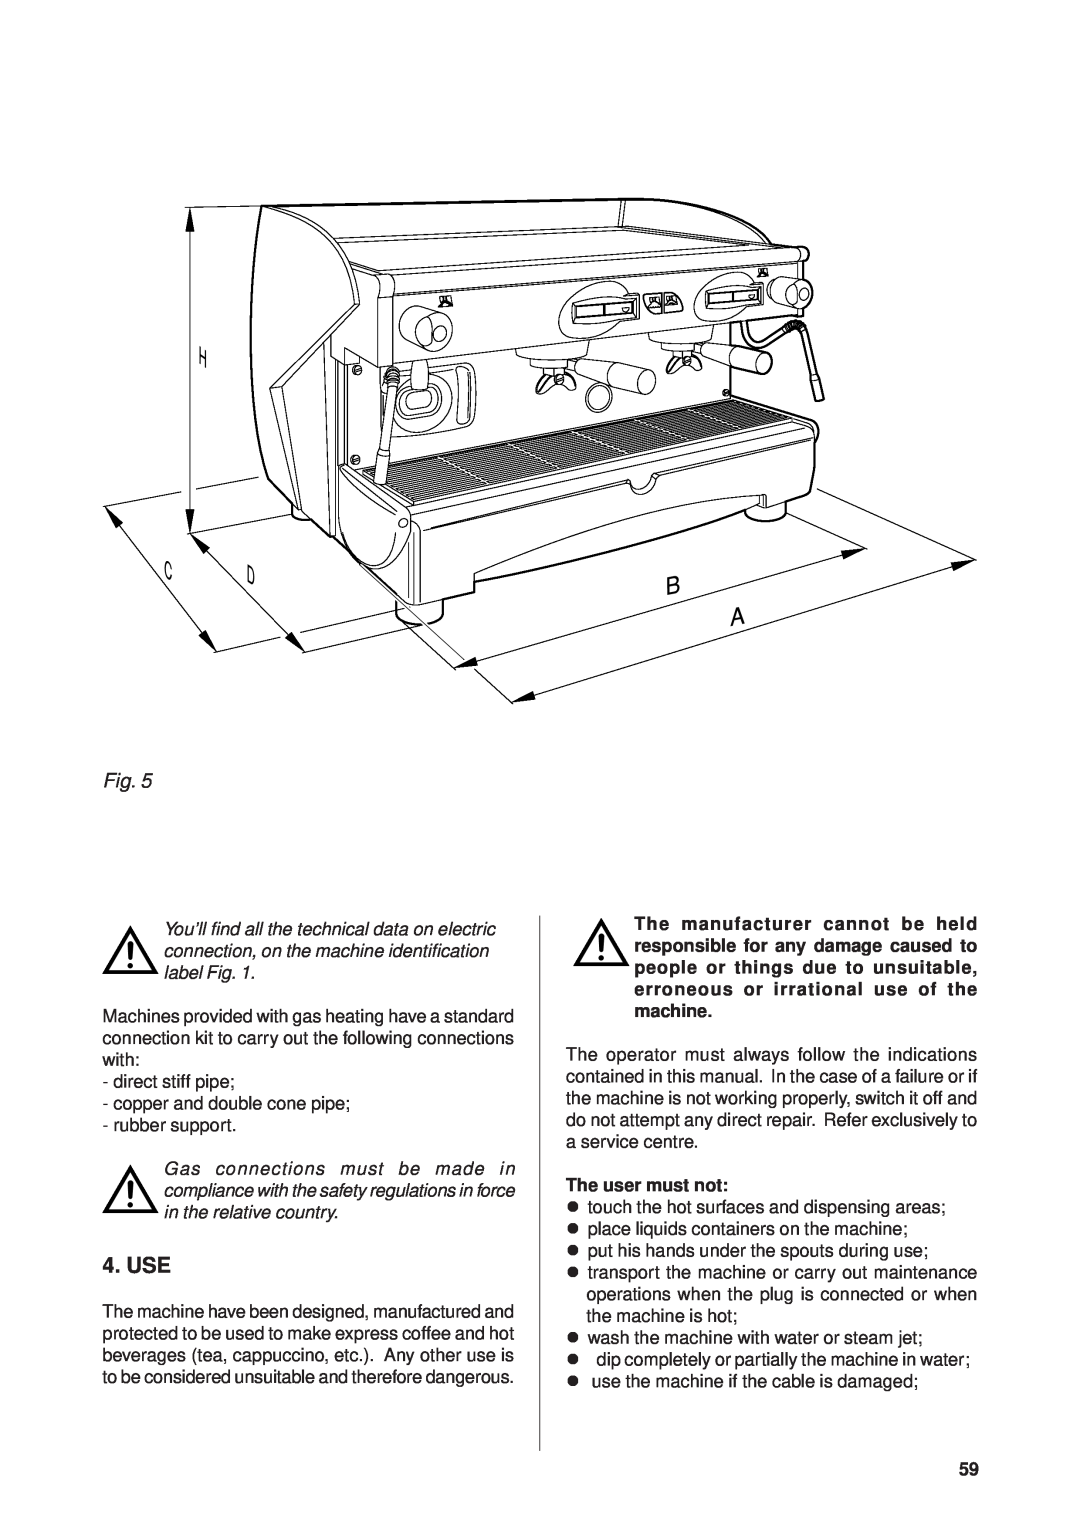 Rancilio Millennium manual Use, The user must not 